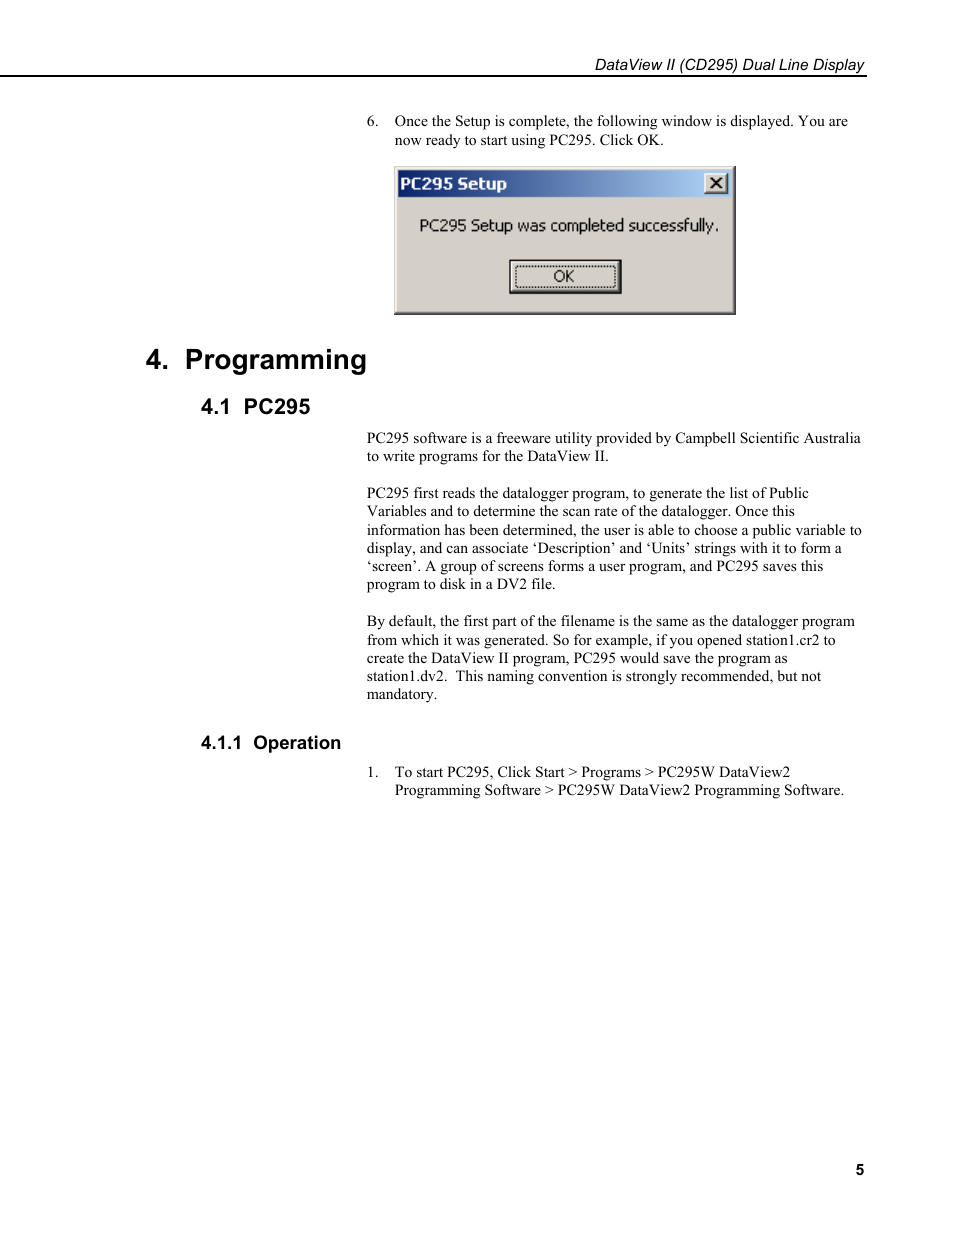 Programming, 1 pc295, 1 operation | Campbell Scientific CD295 DataView II Dual Line Display User Manual | Page 9 / 36